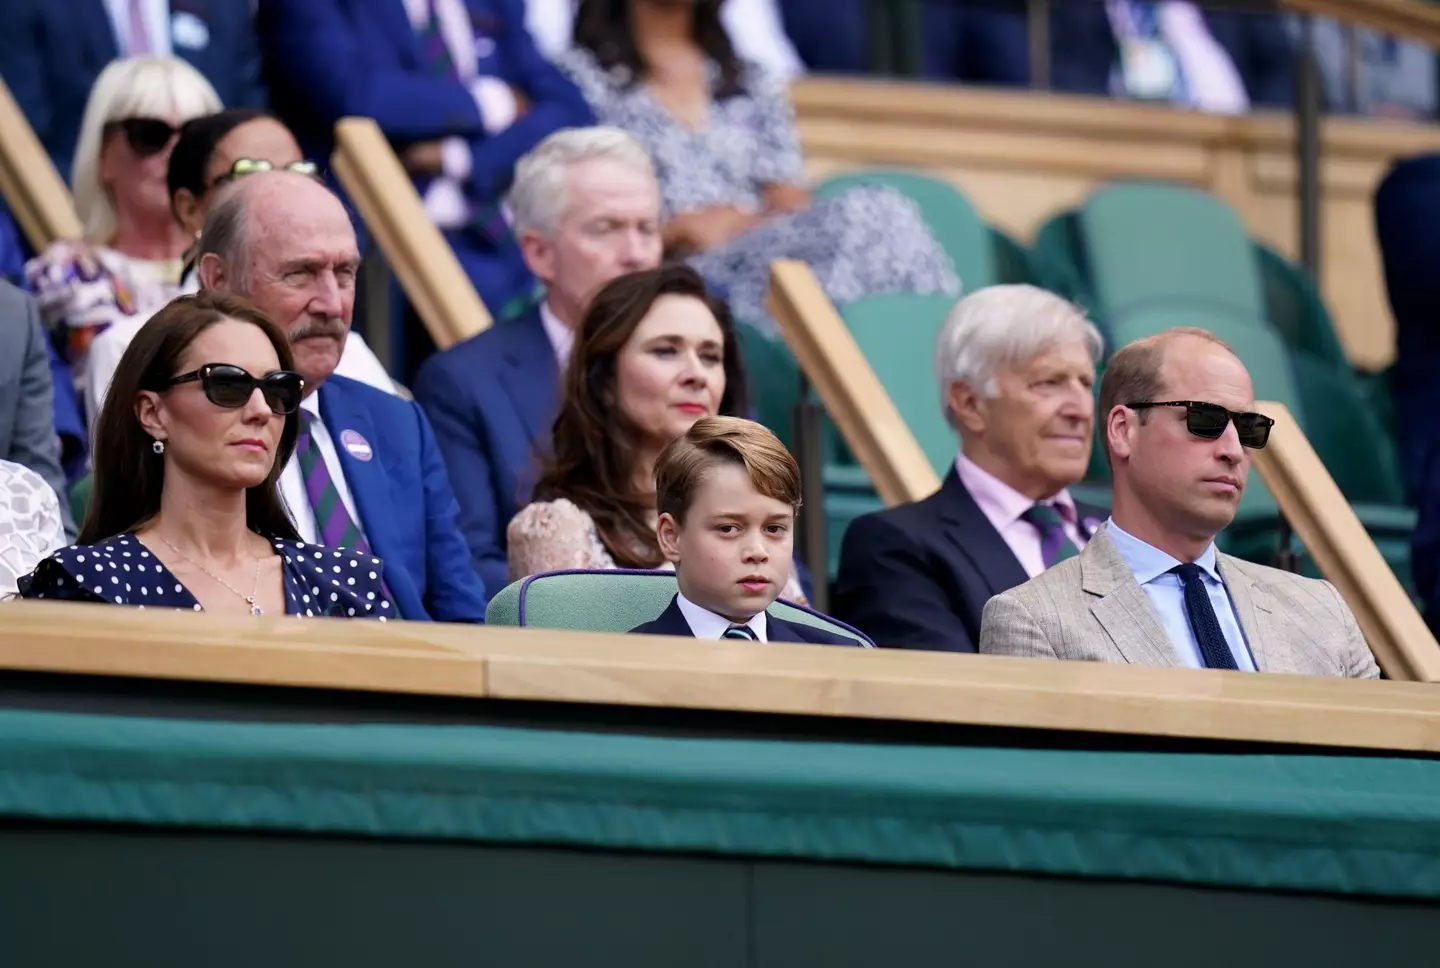 Prince George at Wimbledon with his parents, the Duke and Duchess of Cambridge.